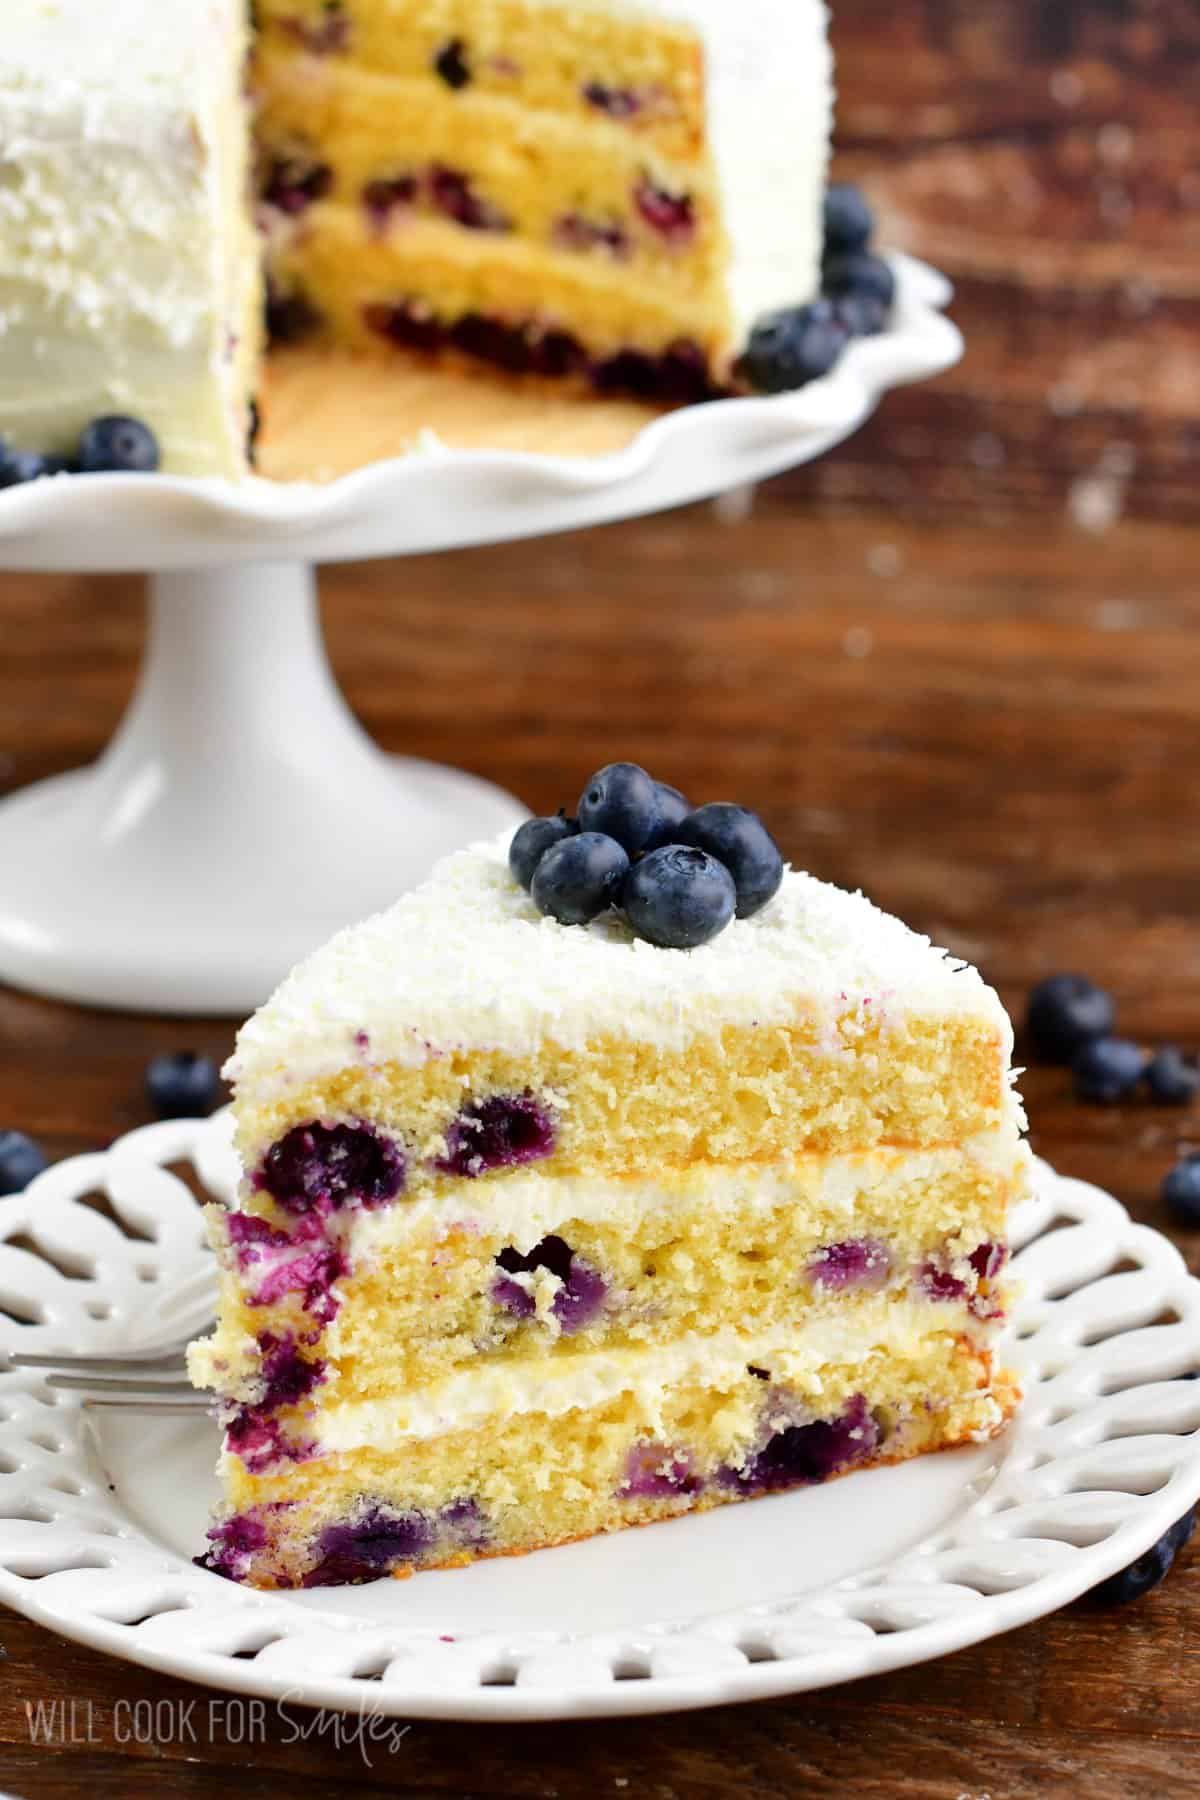 A slice of blueberry cake on a plate next to the cake stans with the rest of the cake.